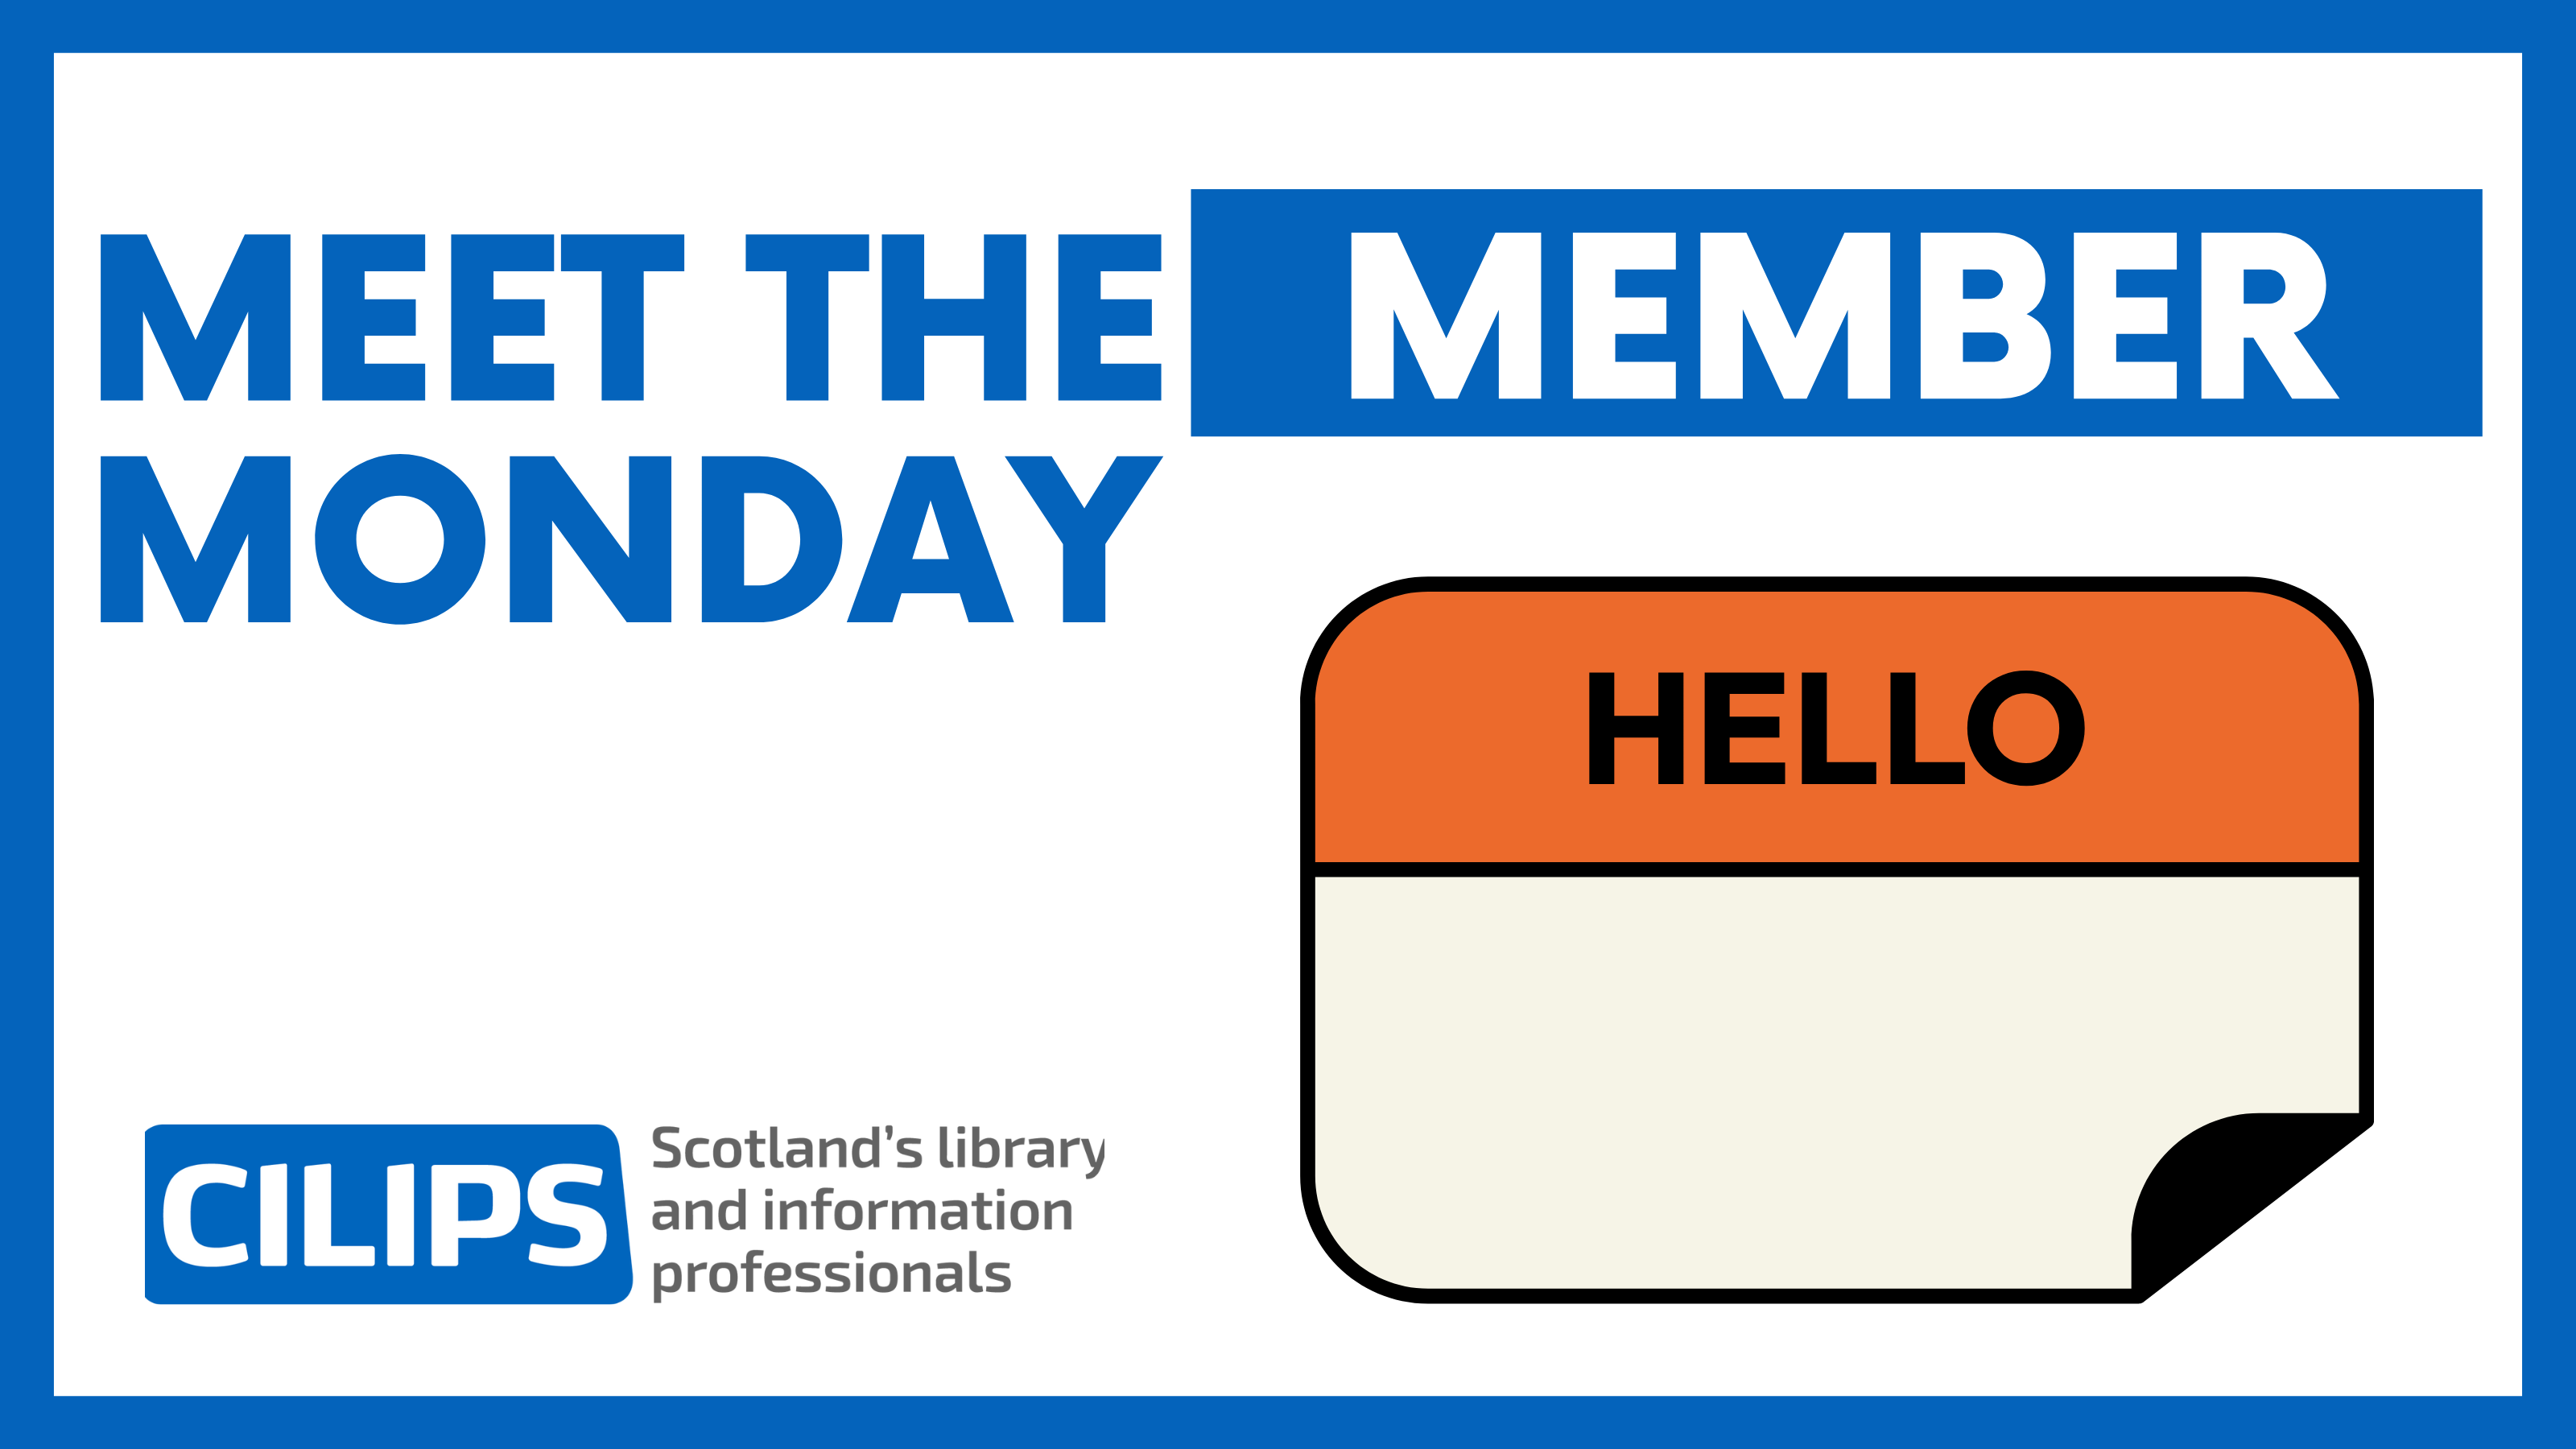 Meet the members Monday, with CILIPS logo and empty name badge